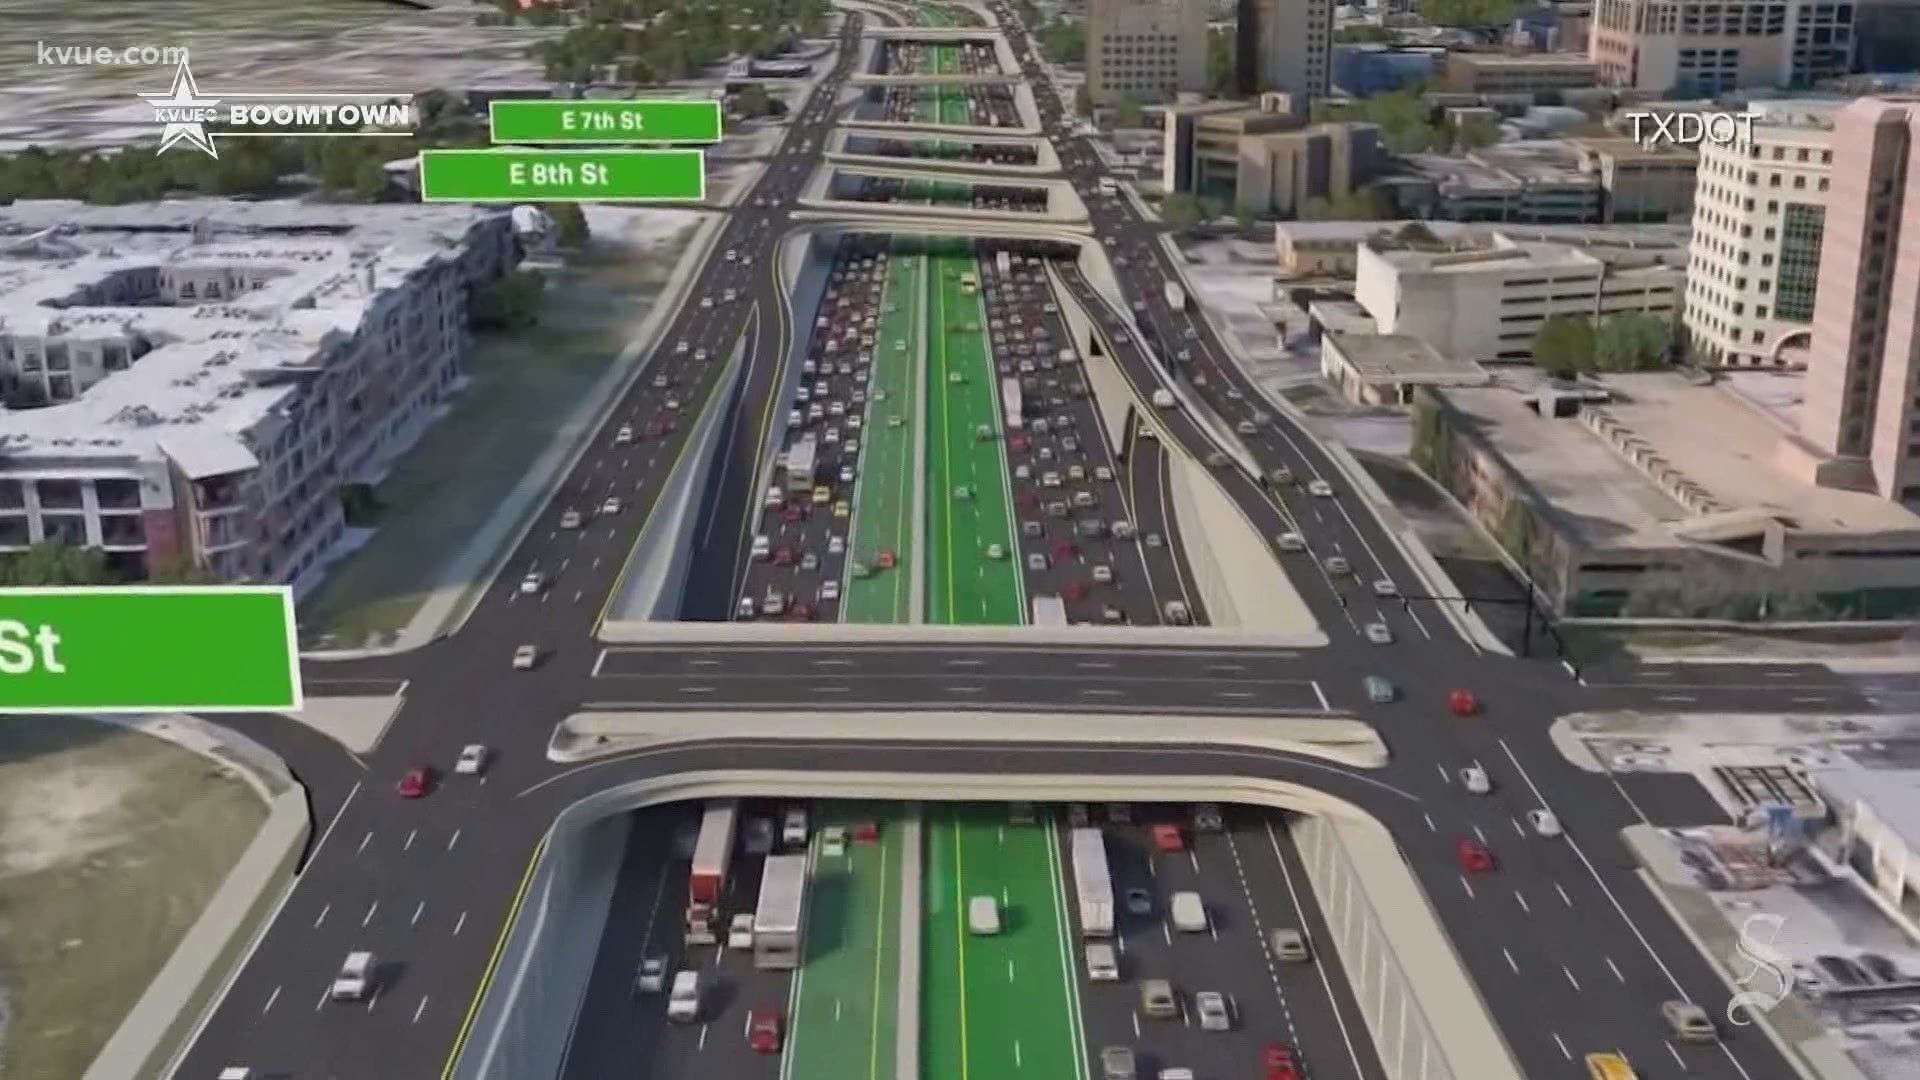 The $4.9B plan to overhaul Interstate 35 through Central Austin is drawing criticism from the City of Austin over safety and its ability to address congestion.